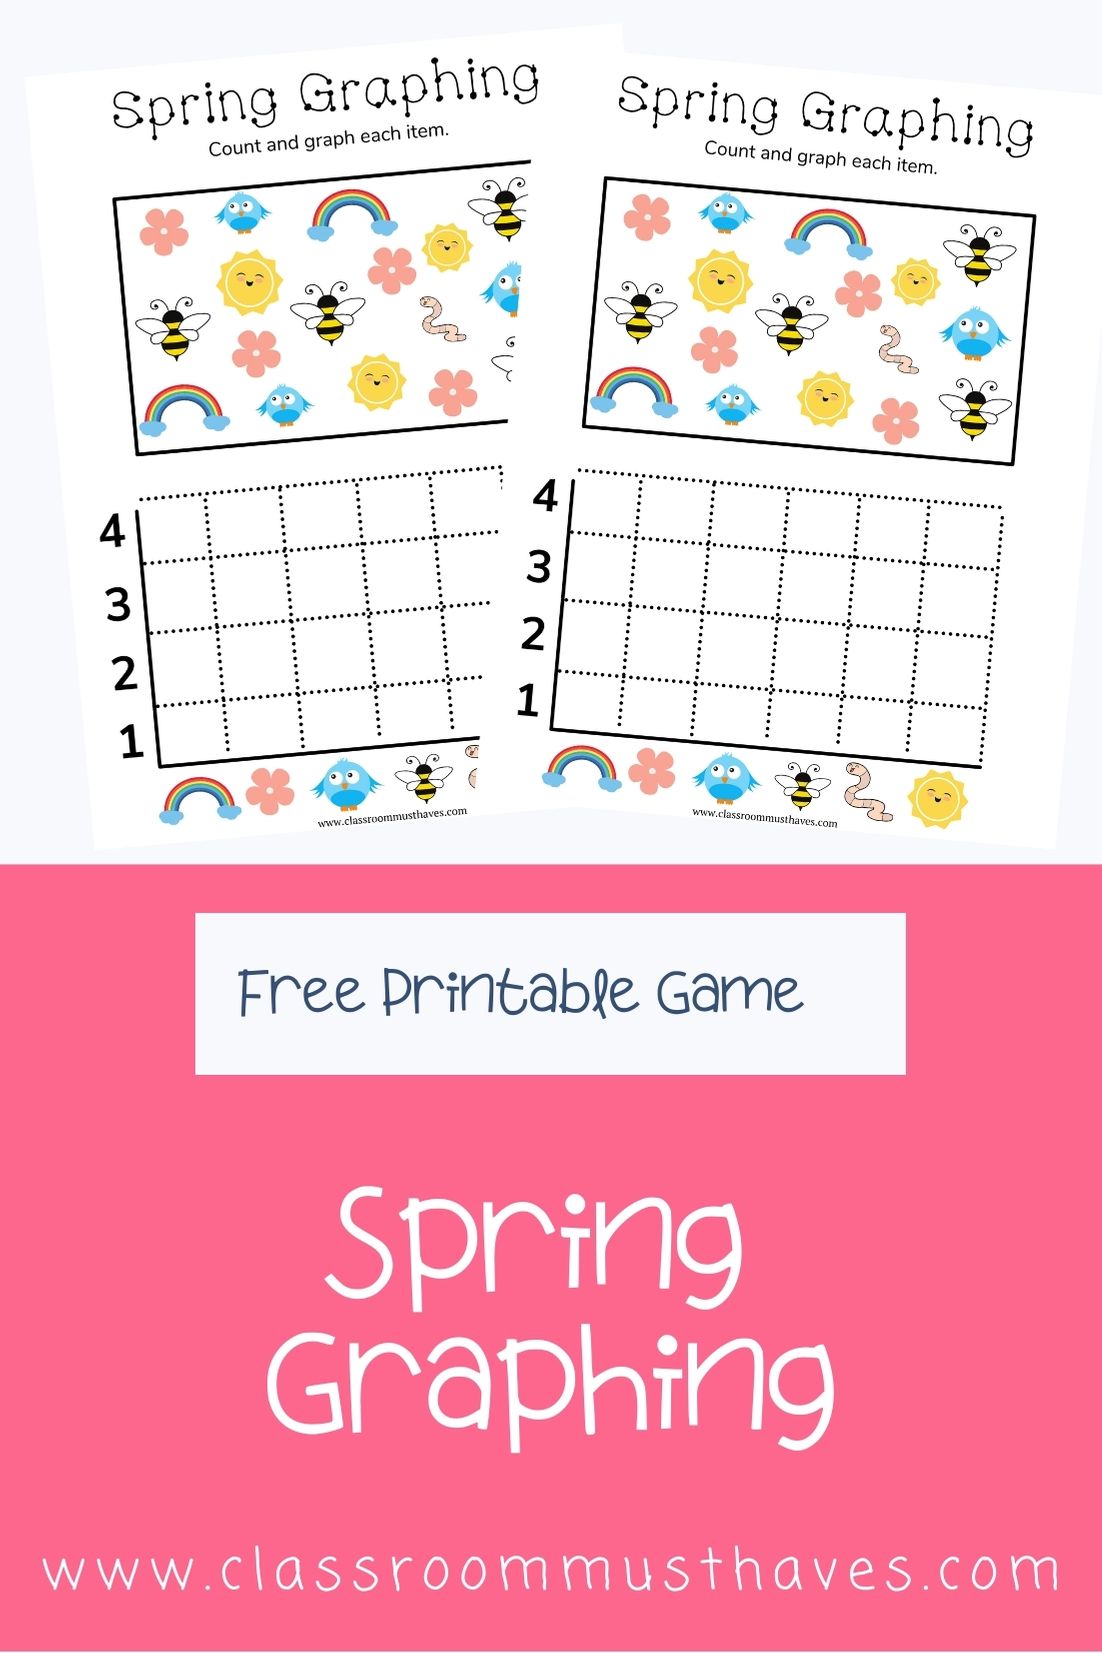 Free Spring Graphing Worksheet! www.classroommusthaves.com via @classroommusthaves